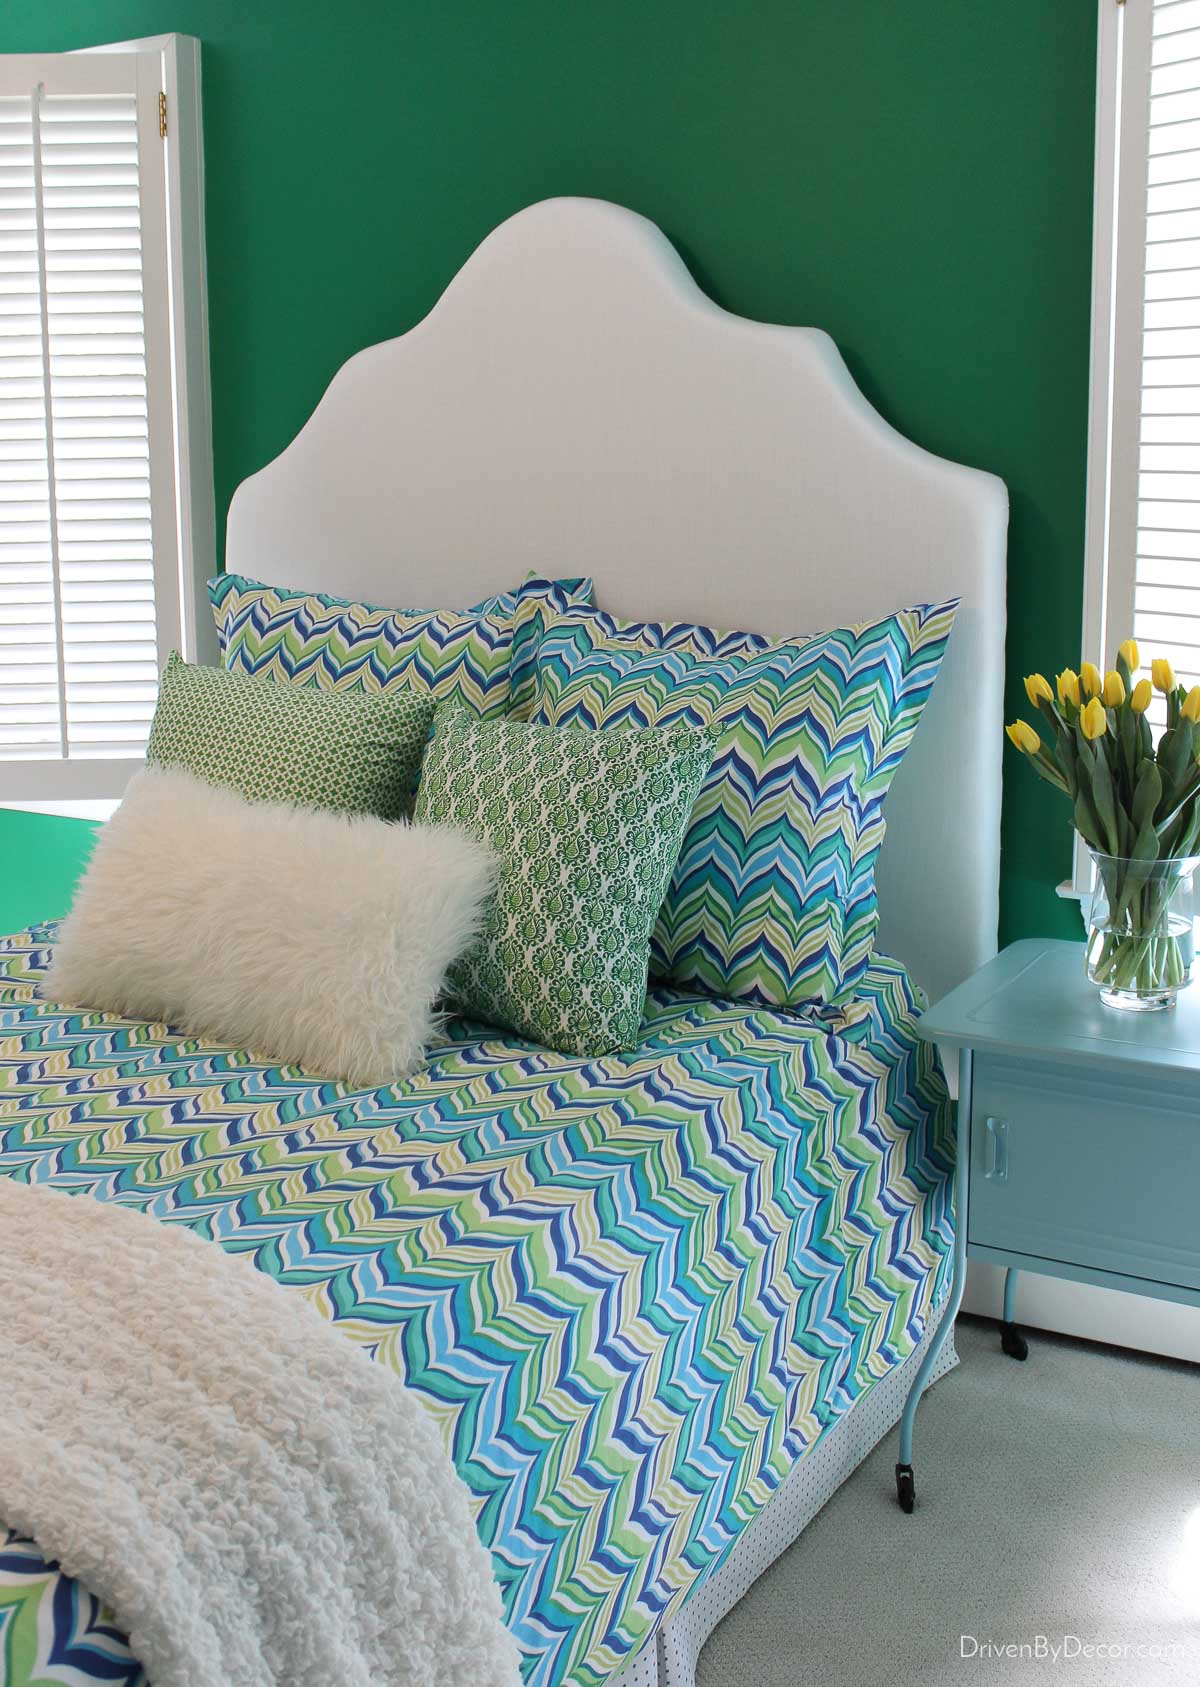 Finished DIY upholstered bed in bedroom with green, blue, and yellow bedding